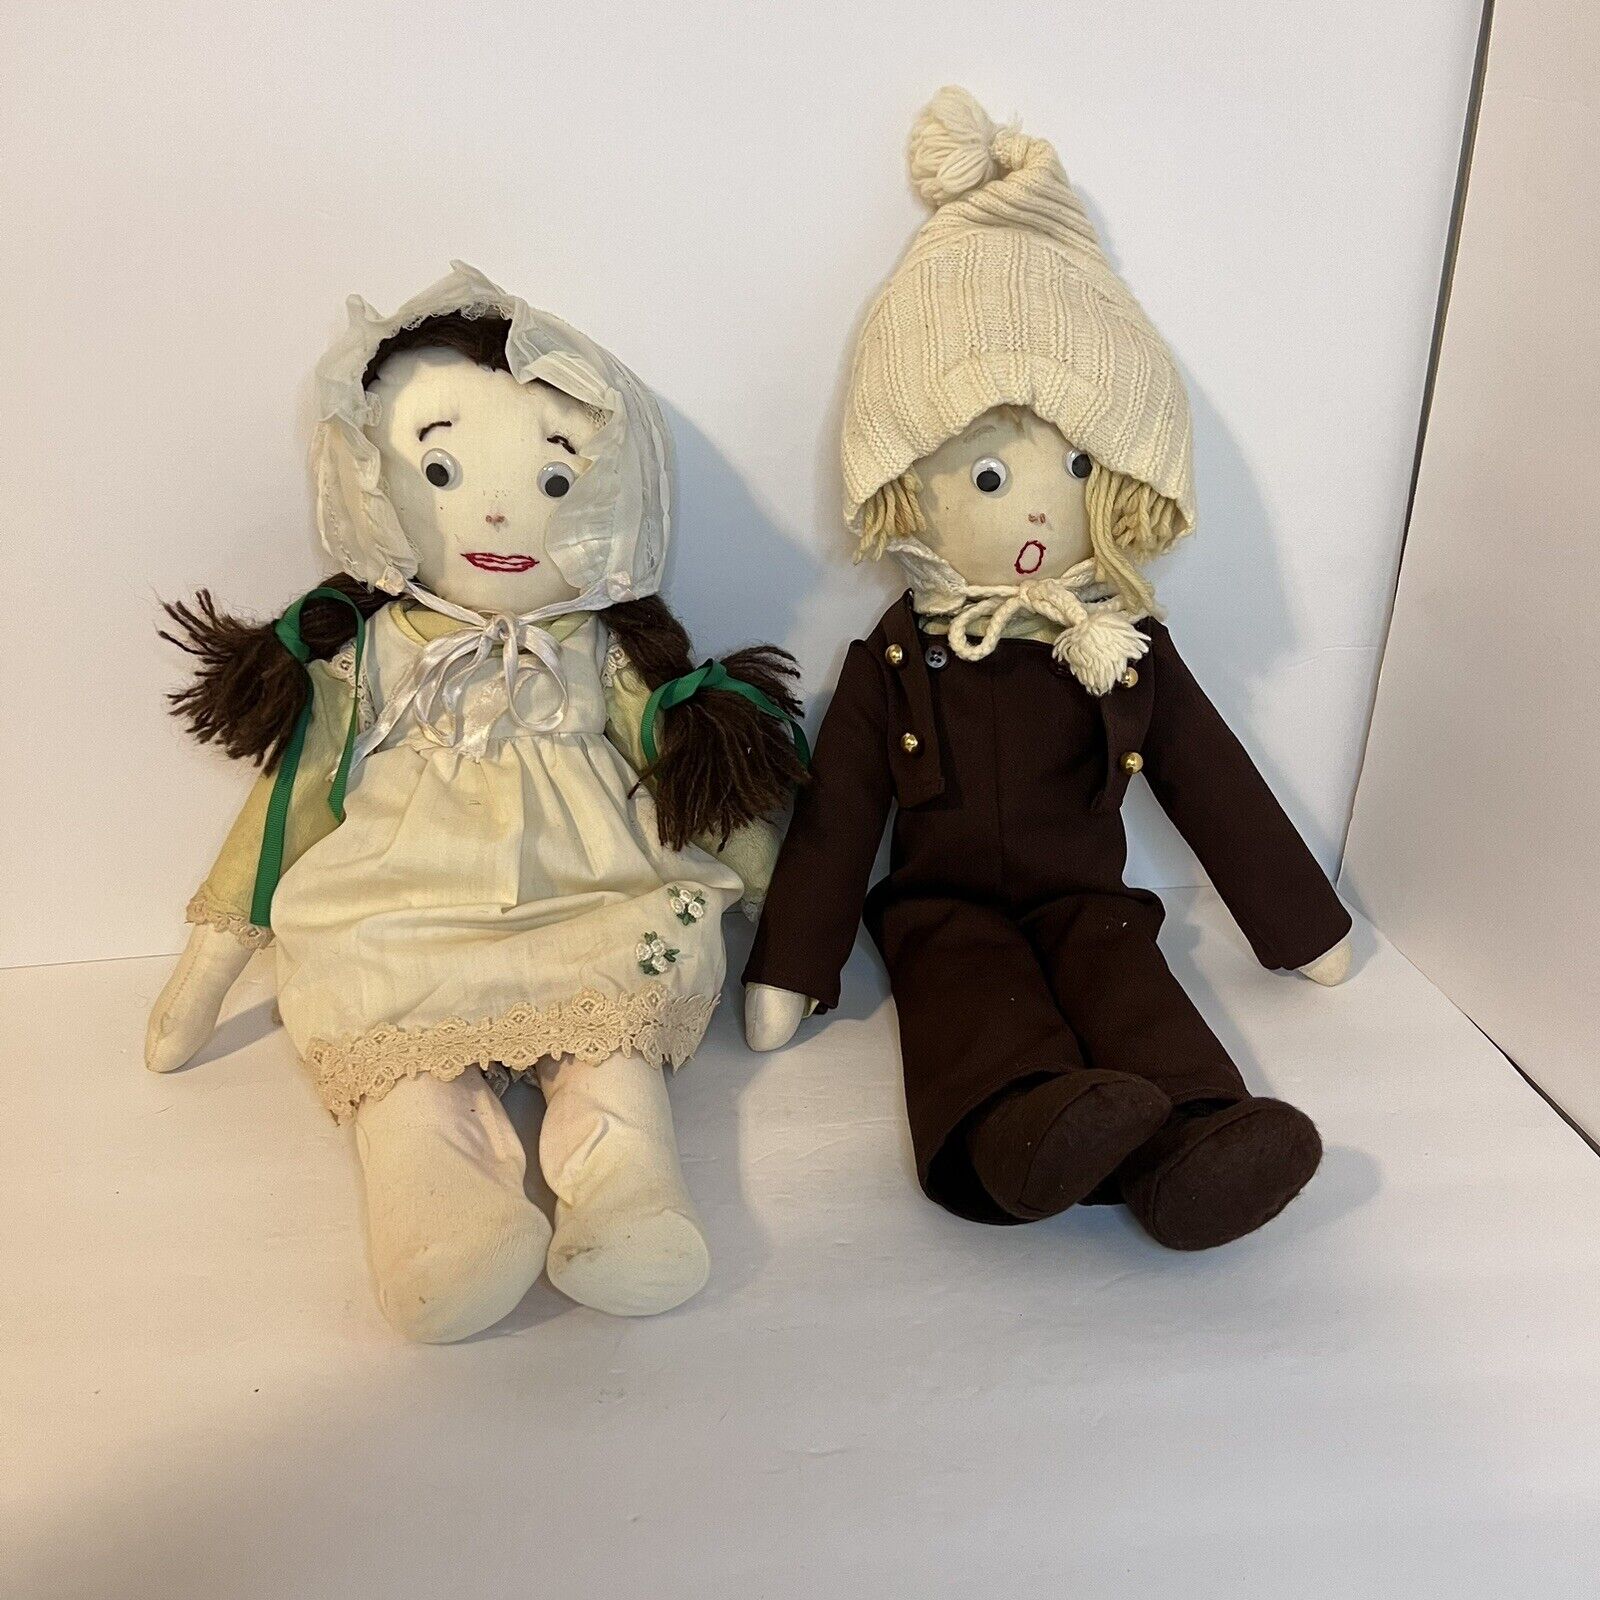 Two Antique Handmade Embroidered Face Cloth Dolls Pigtails, Overalls, Googly Eye